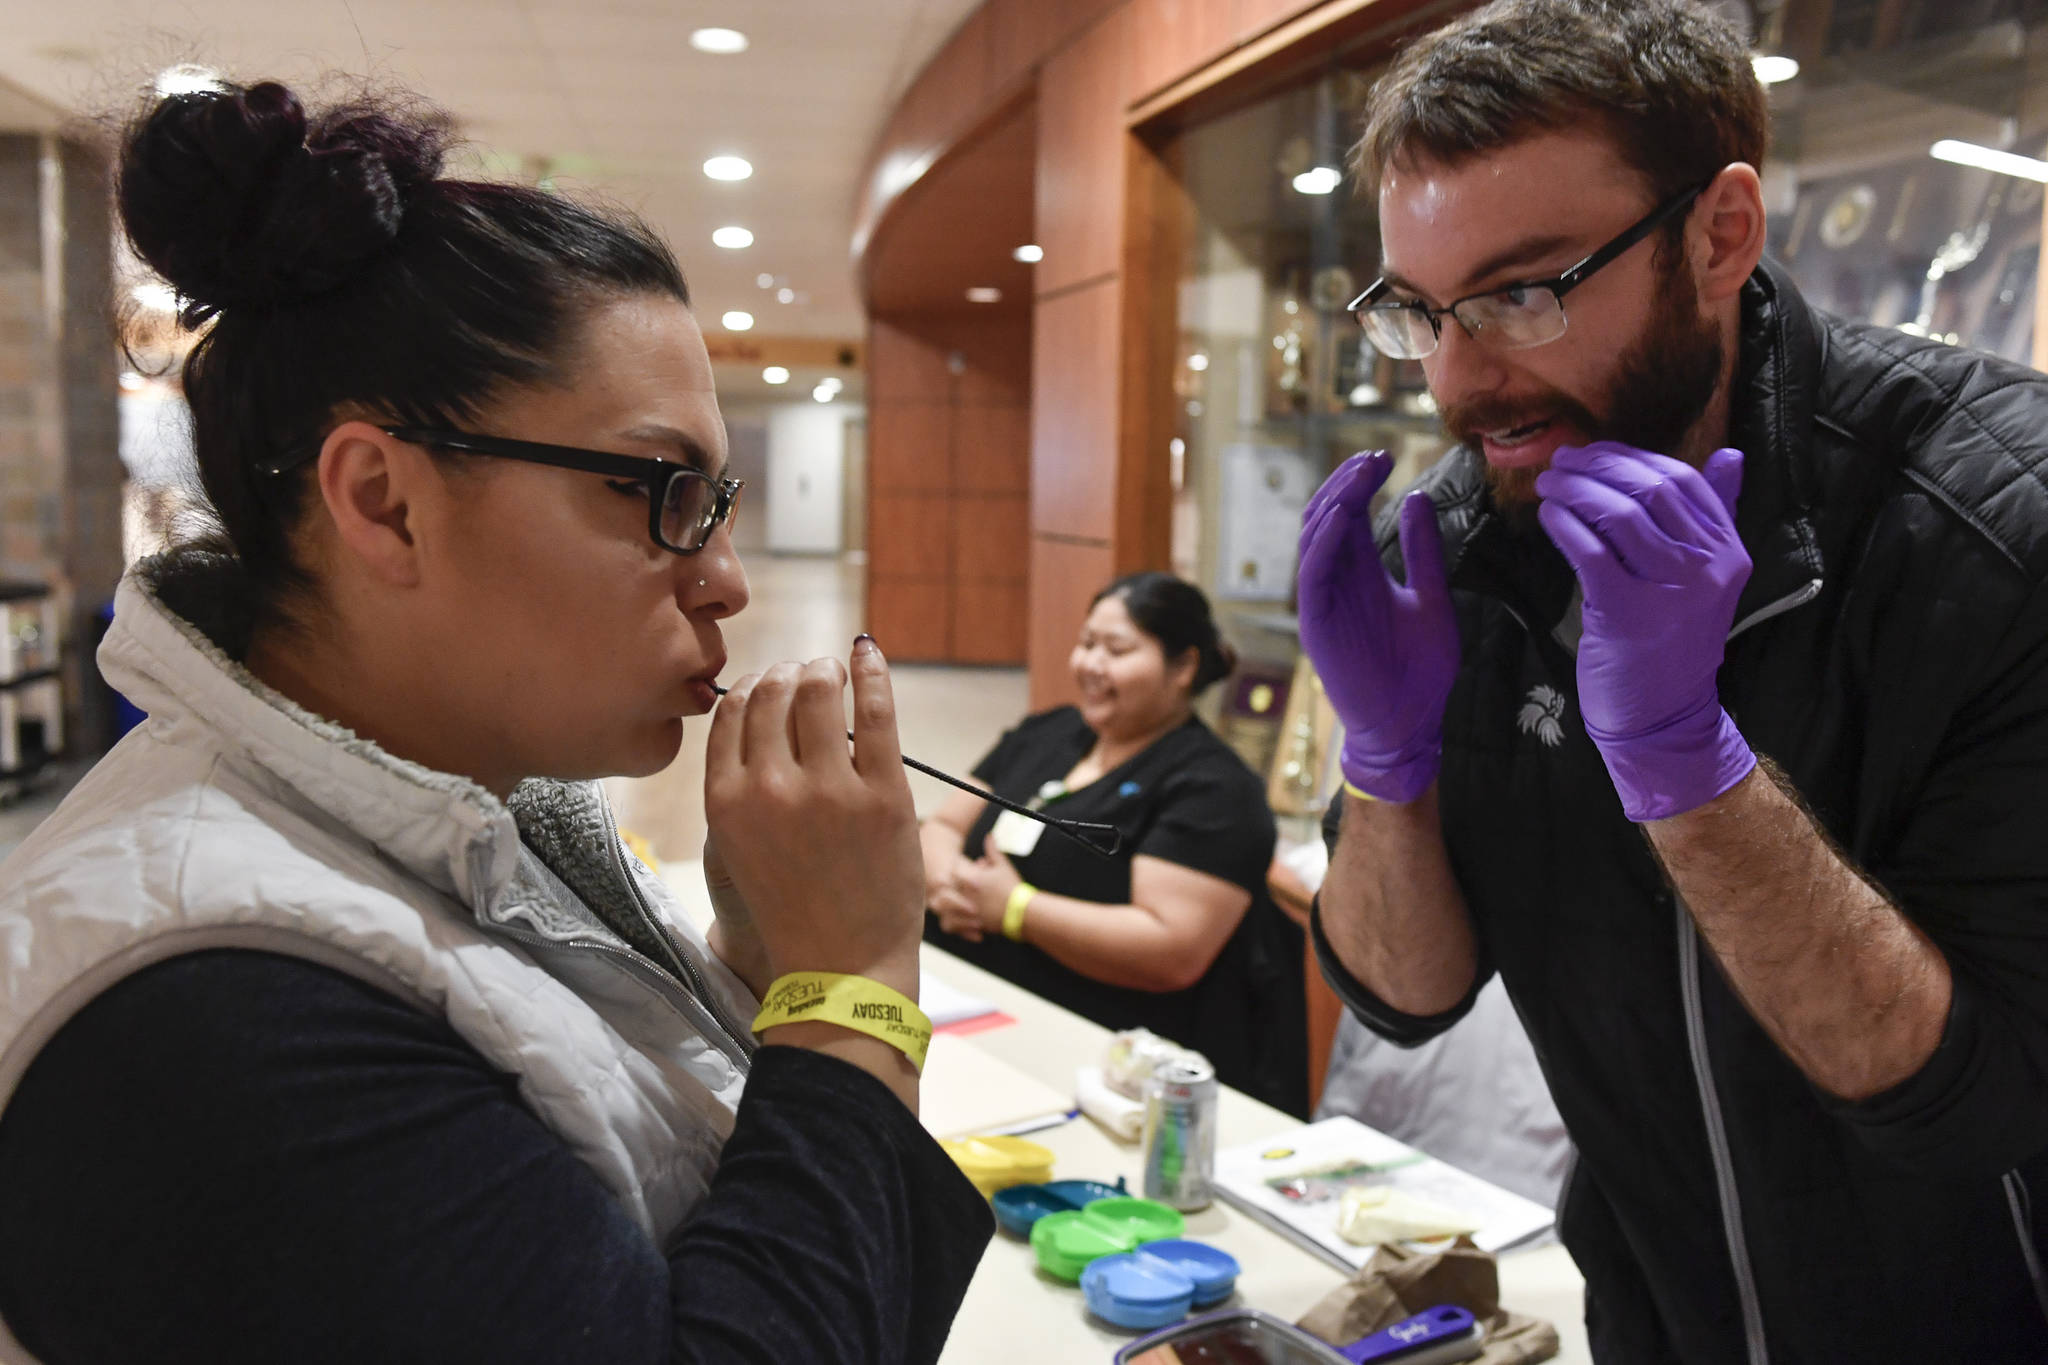 Dr. Jordan White, right, a dentist with the Southeast Alaska Regional Health Consortium, helps fit a mouth guard for Barbara Jean Johnson, of Yakutat, at the Juneau Lions Club 73rd Annual Gold Medal Basketball Tournament at Juneau-Douglas High School: Yadaa.at Kalé on Tuesday, March 19, 2019. (Michael Penn | Juneau Empire)